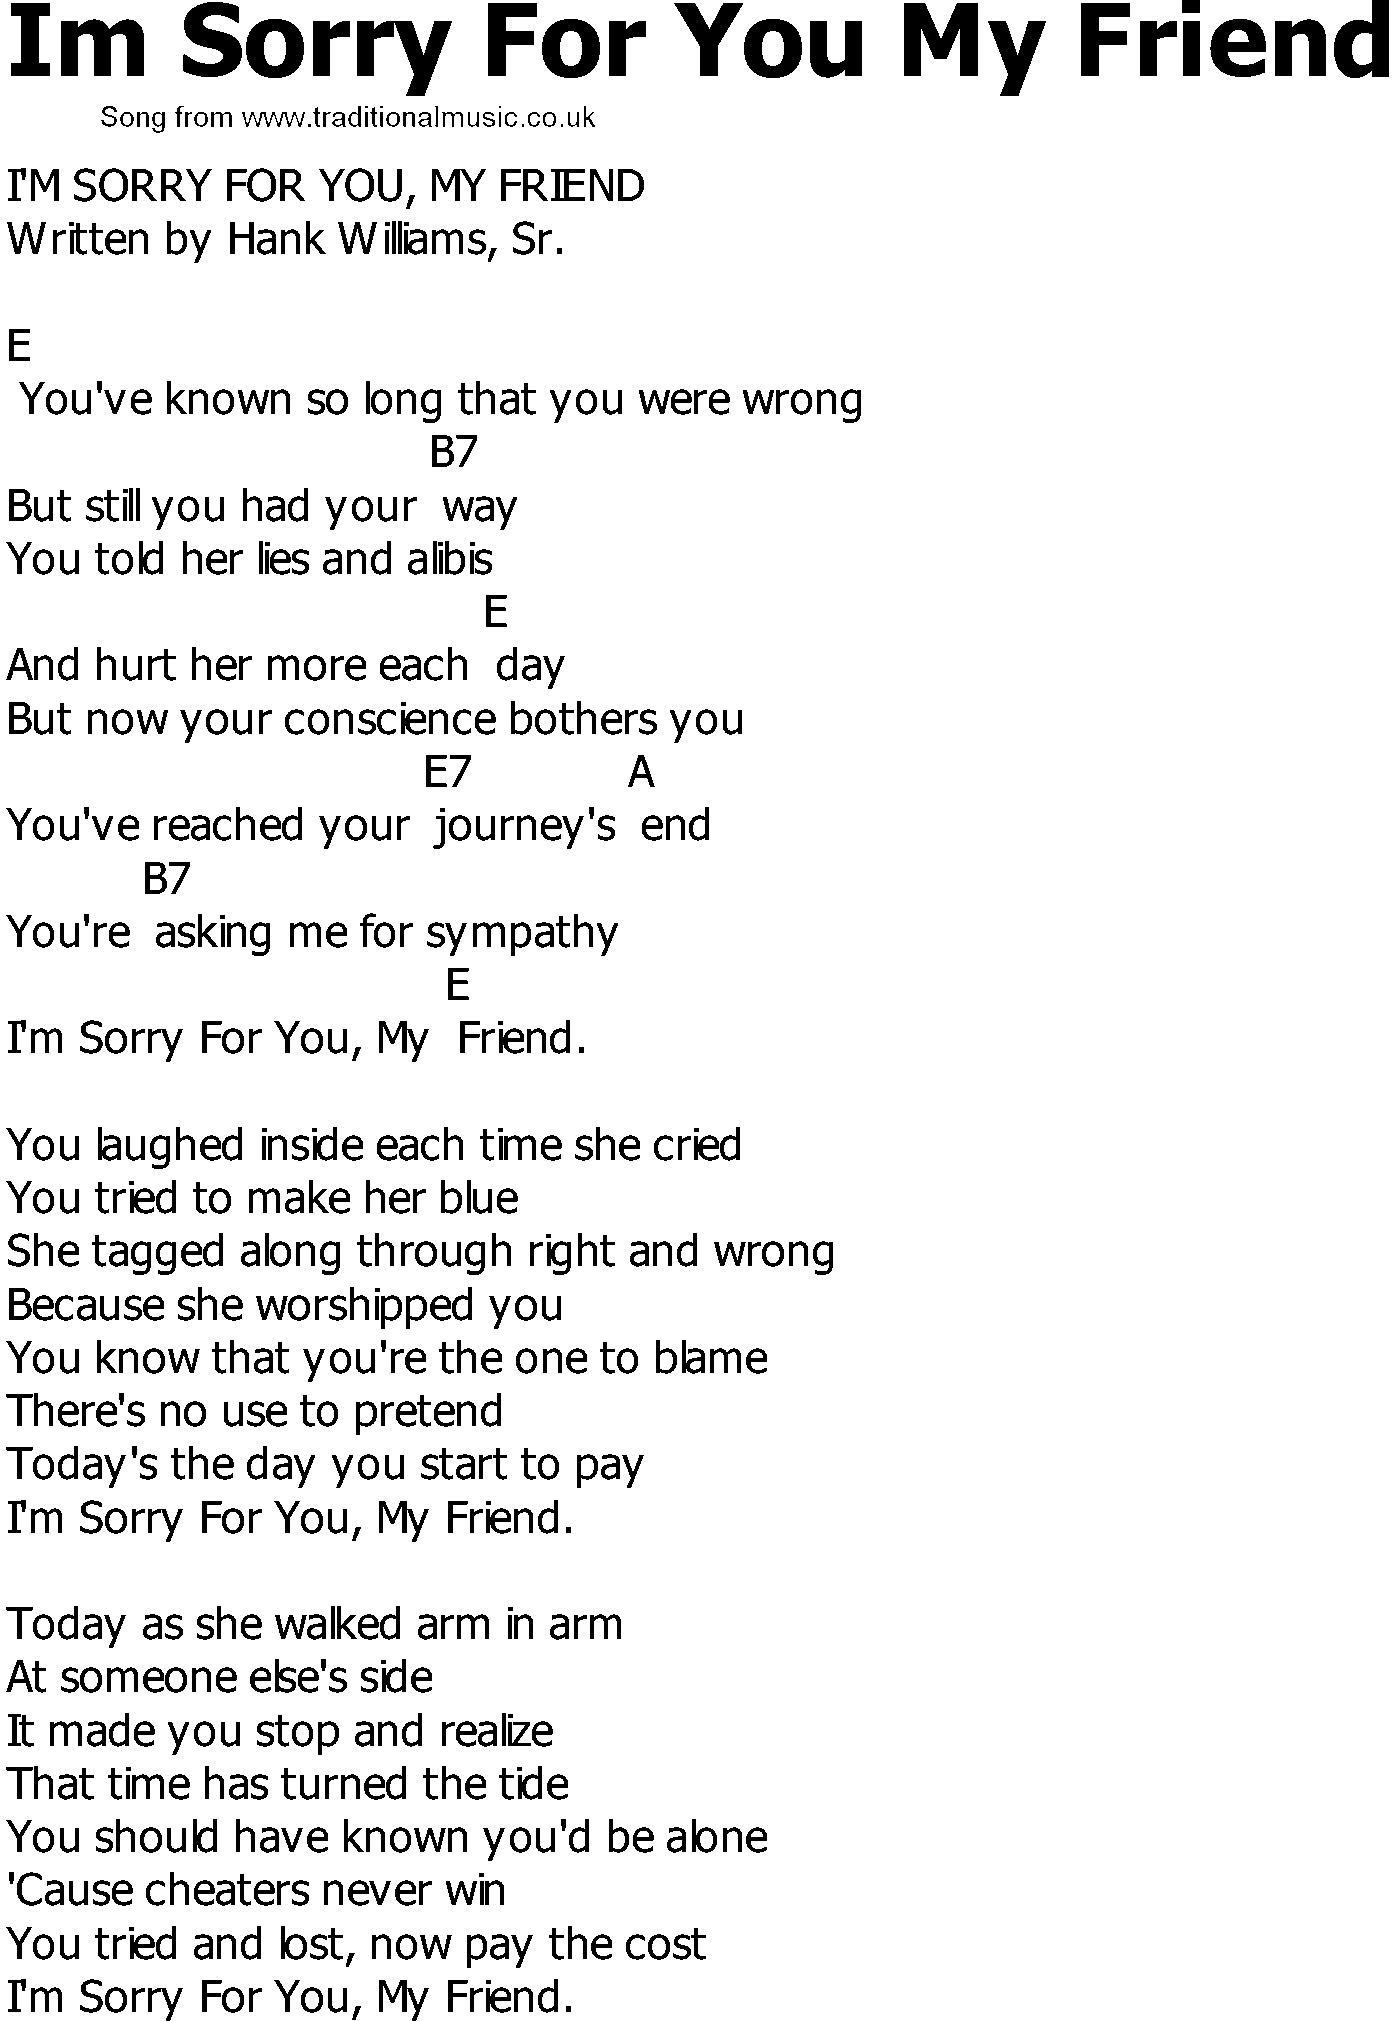 Old Country song lyrics with chords - Im Sorry For You My Friend